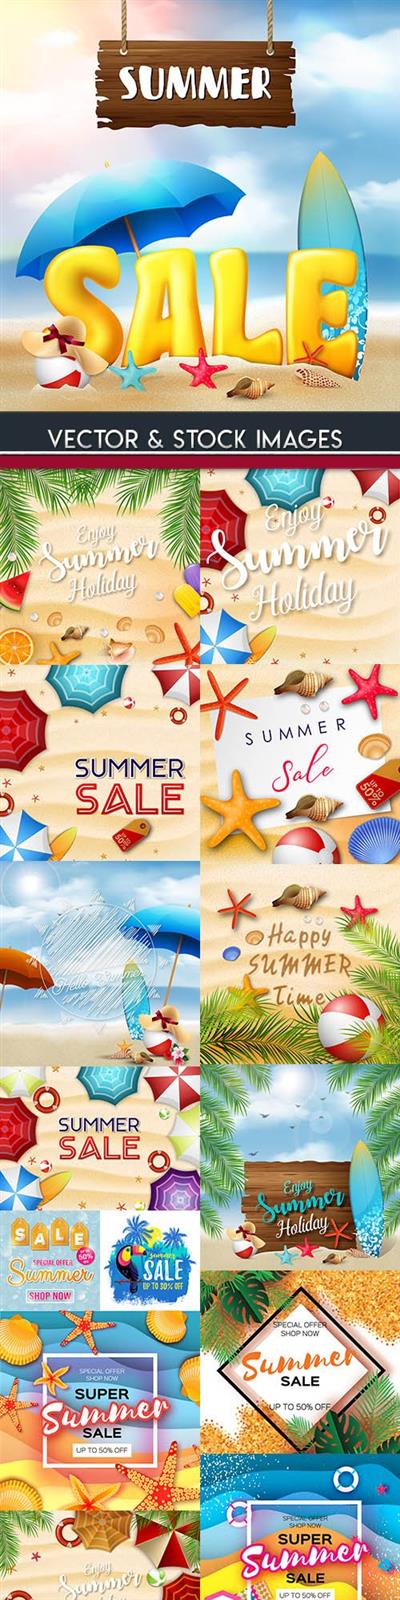 Summer sales and discount holiday banner illustrations 8